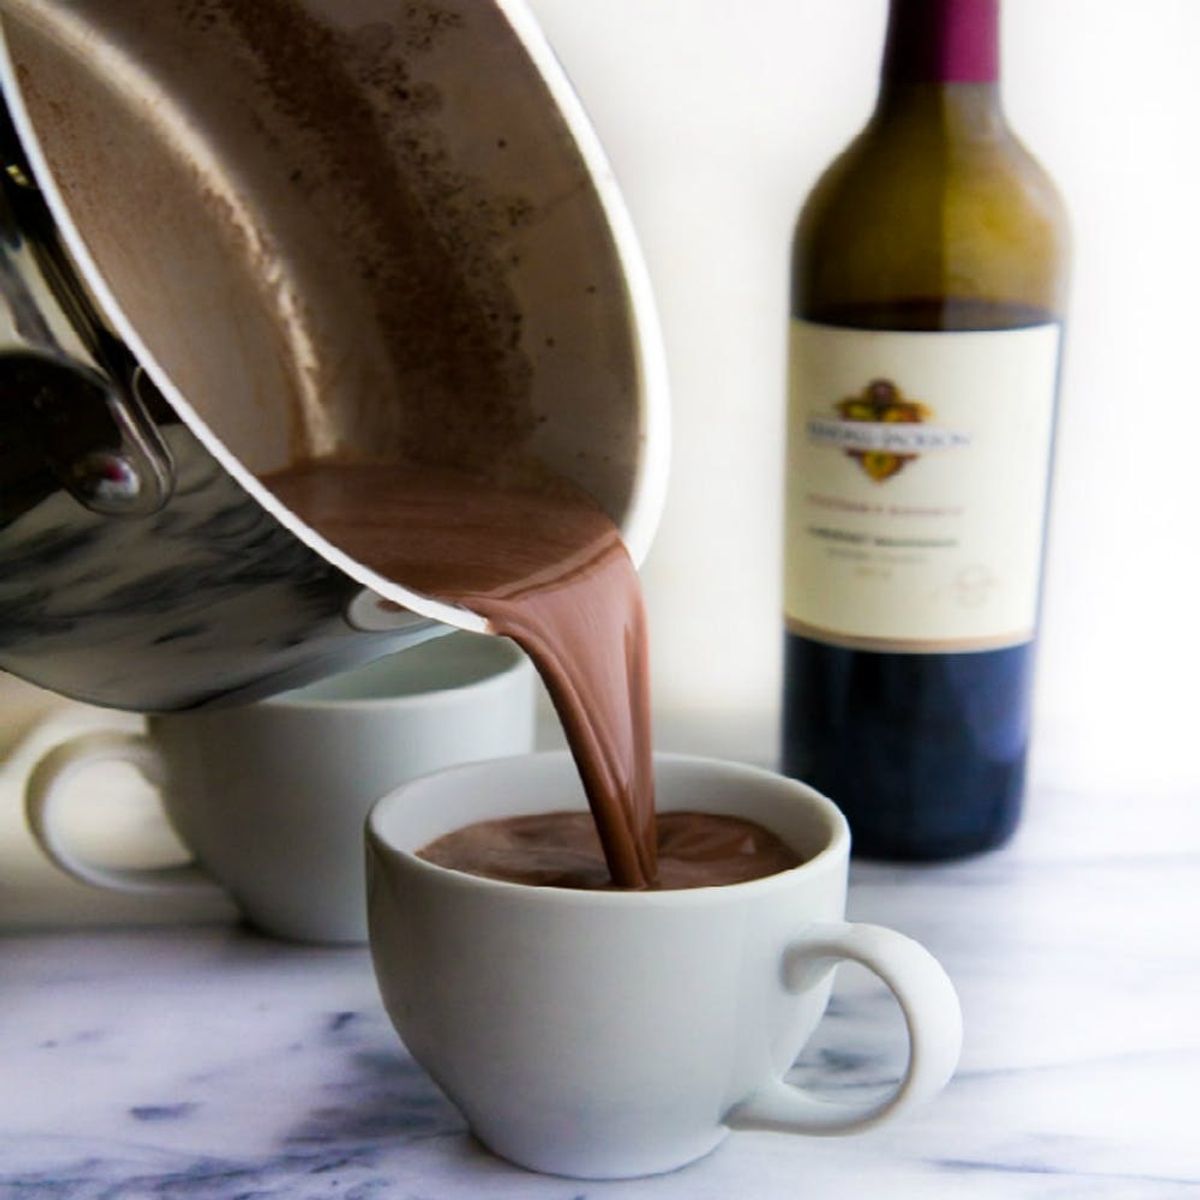 Red Wine Hot Chocolate Is the Savory Drink You’ll Be Sipping All Winter